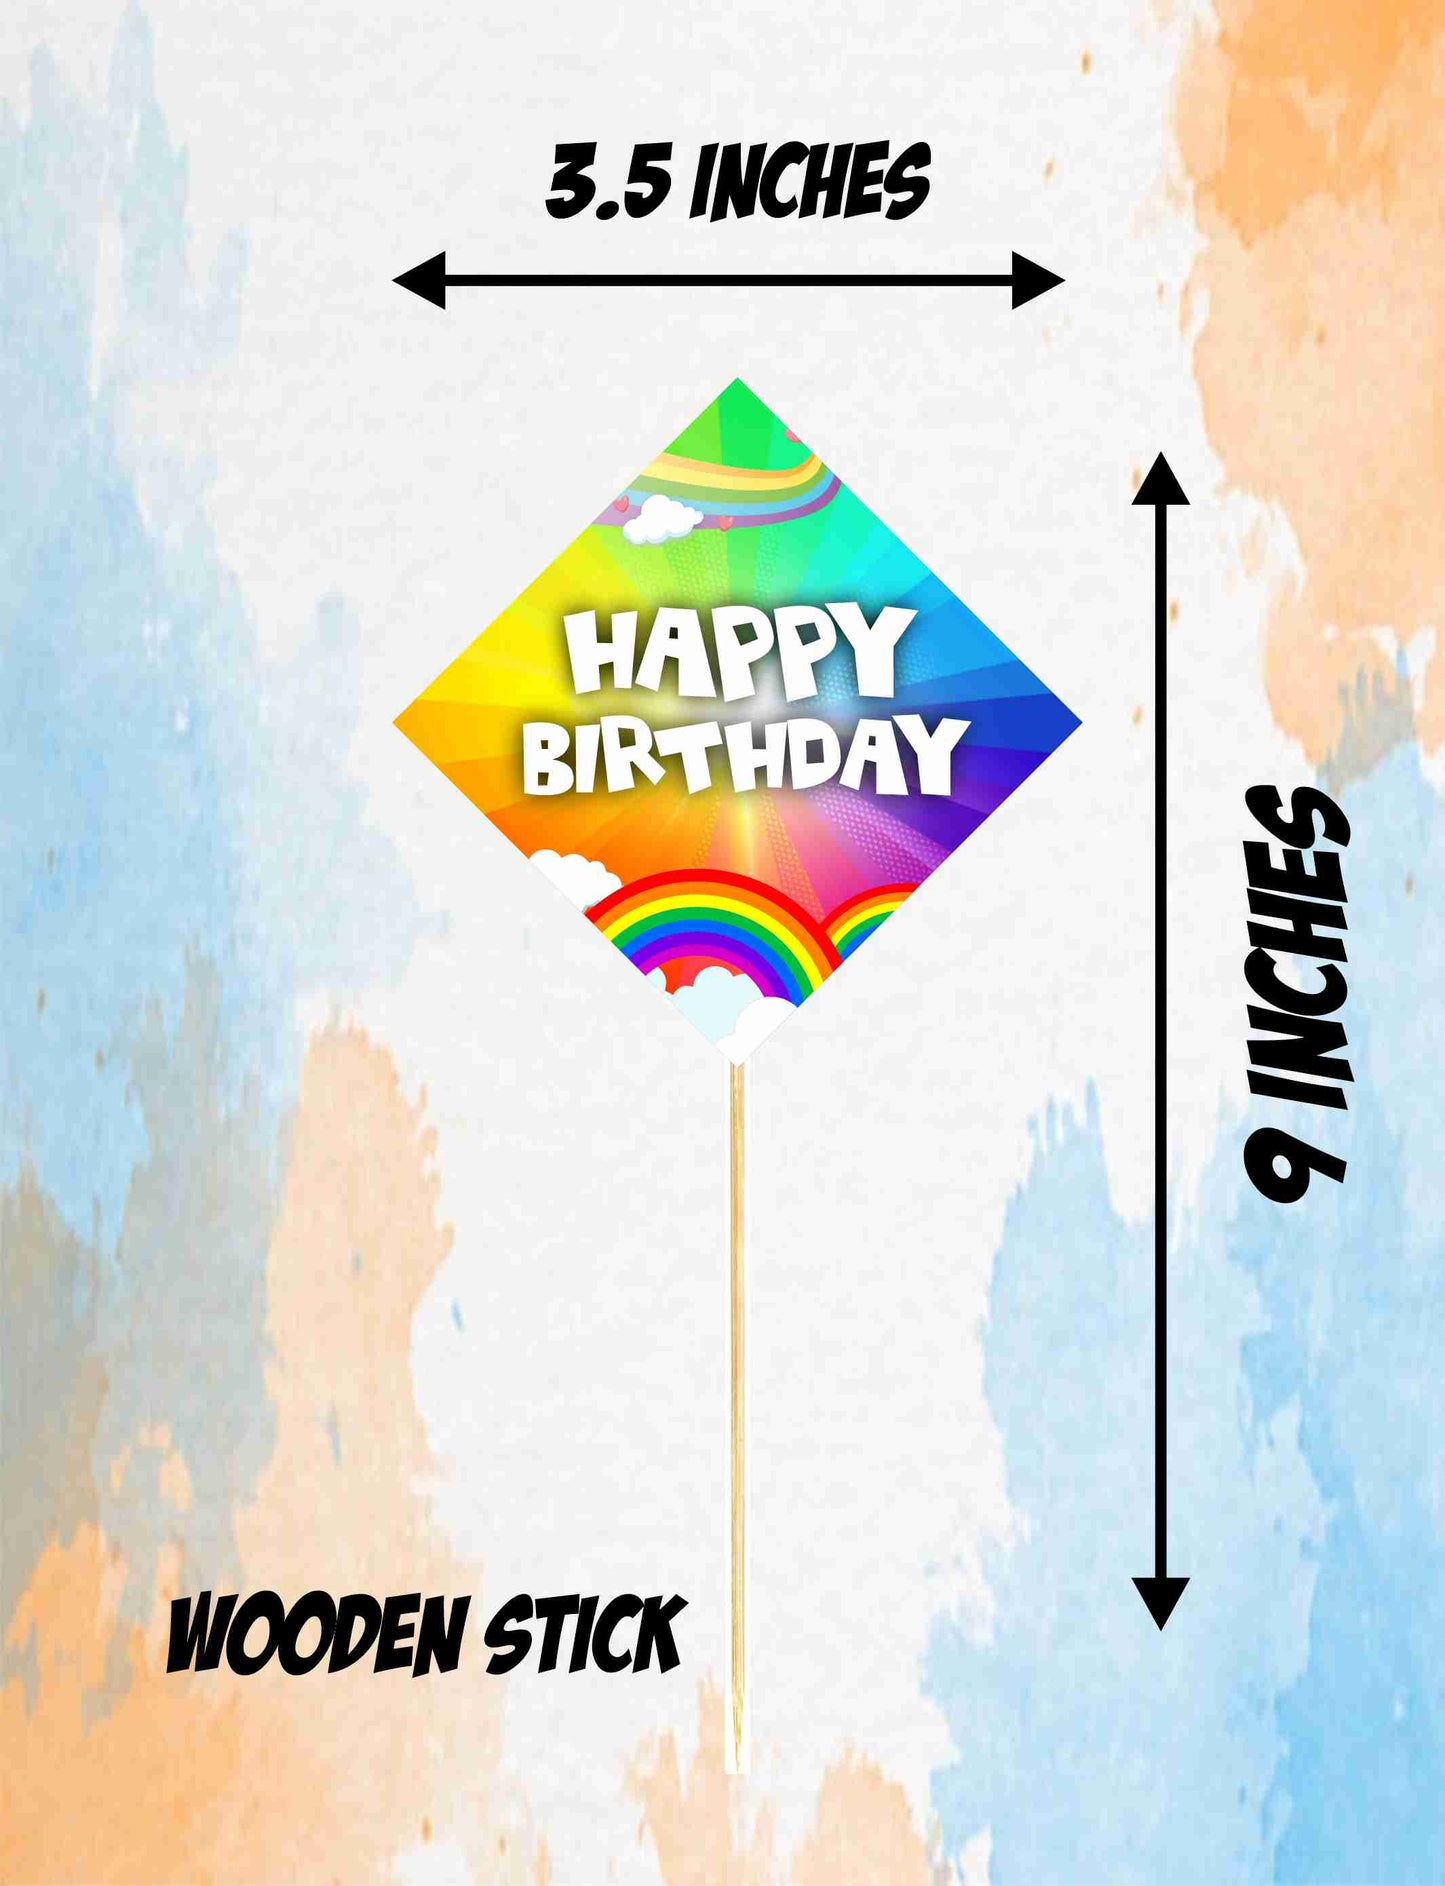 Rainbow Theme Cake Topper Pack of 10 Nos for Birthday Cake Decoration Theme Party Item For Boys Girls Adults Birthday Theme Decor